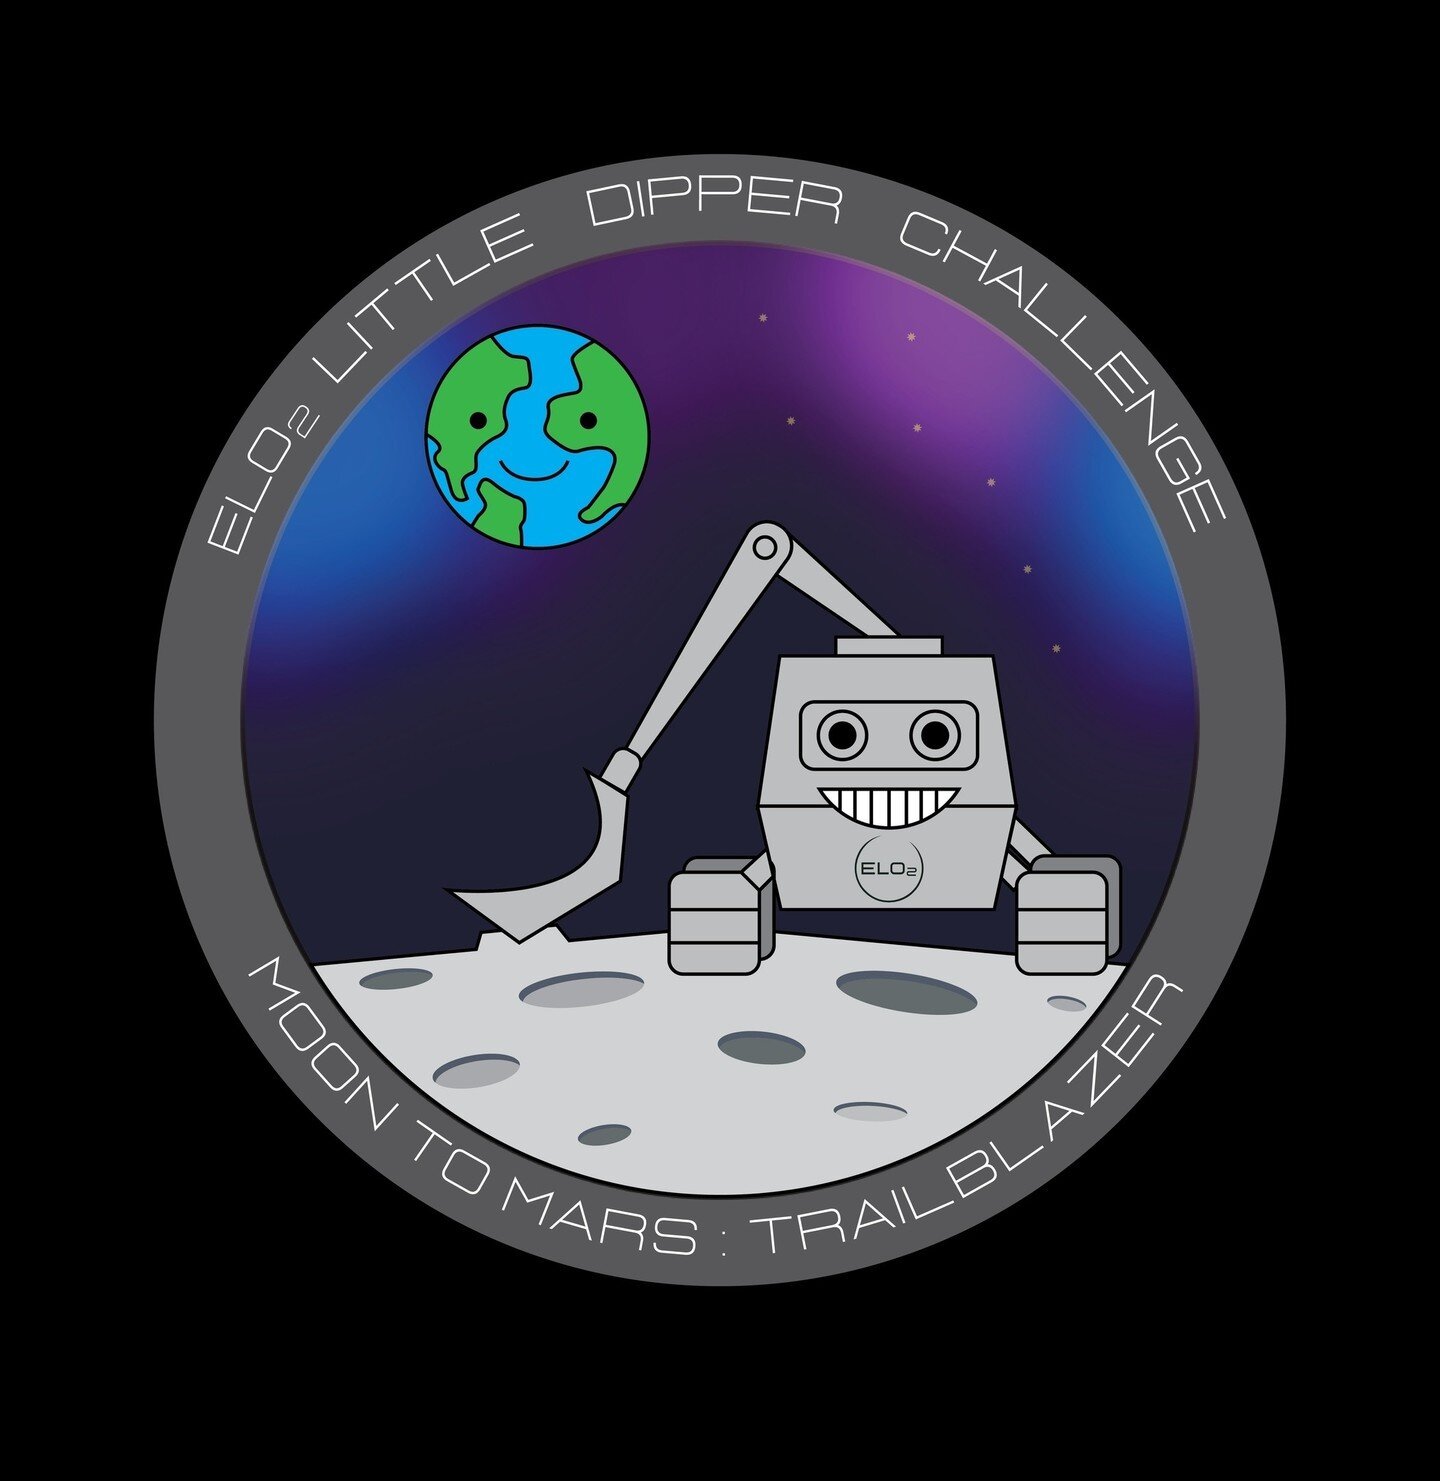 Looking for a fun activity to inspire learning in the new school year? The Little Dipper Challenge is a stellar initiative tailored for our youngest space enthusiasts, ages 5-12, providing them with an out-of-this-world experience. If you know a budd